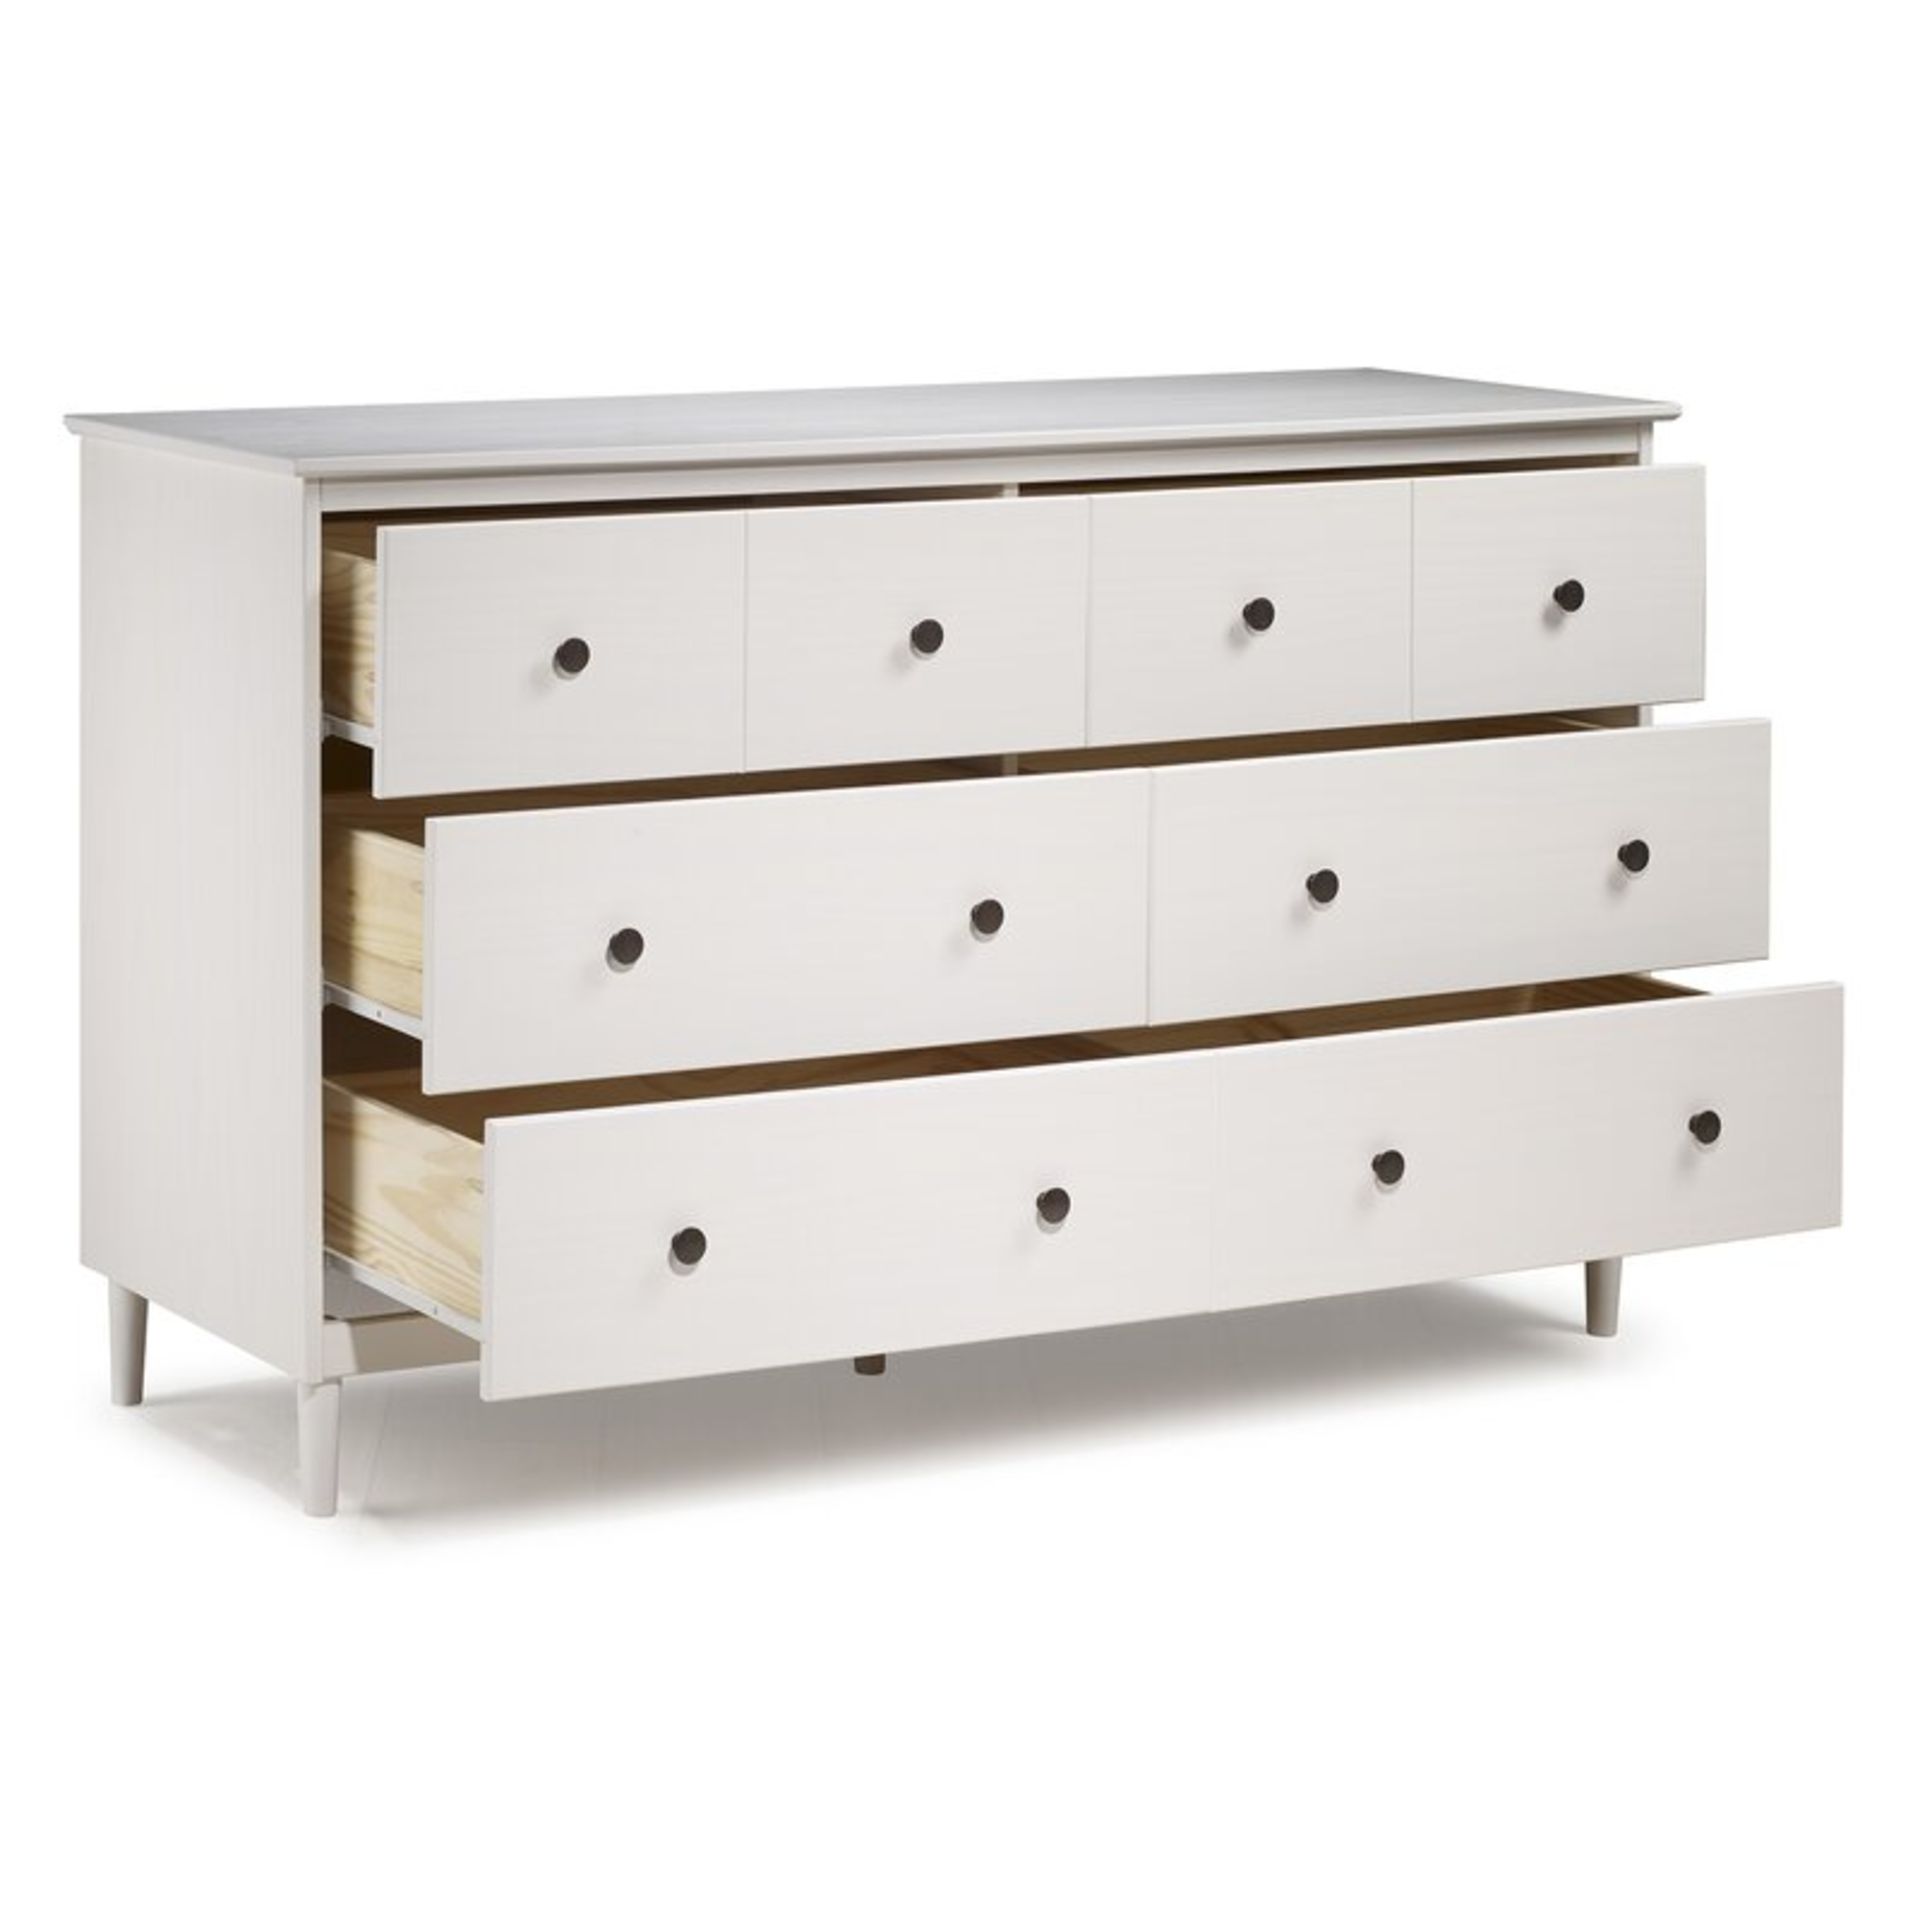 Tylor 6 Drawer Chest - RRP £386.99 - Image 2 of 4